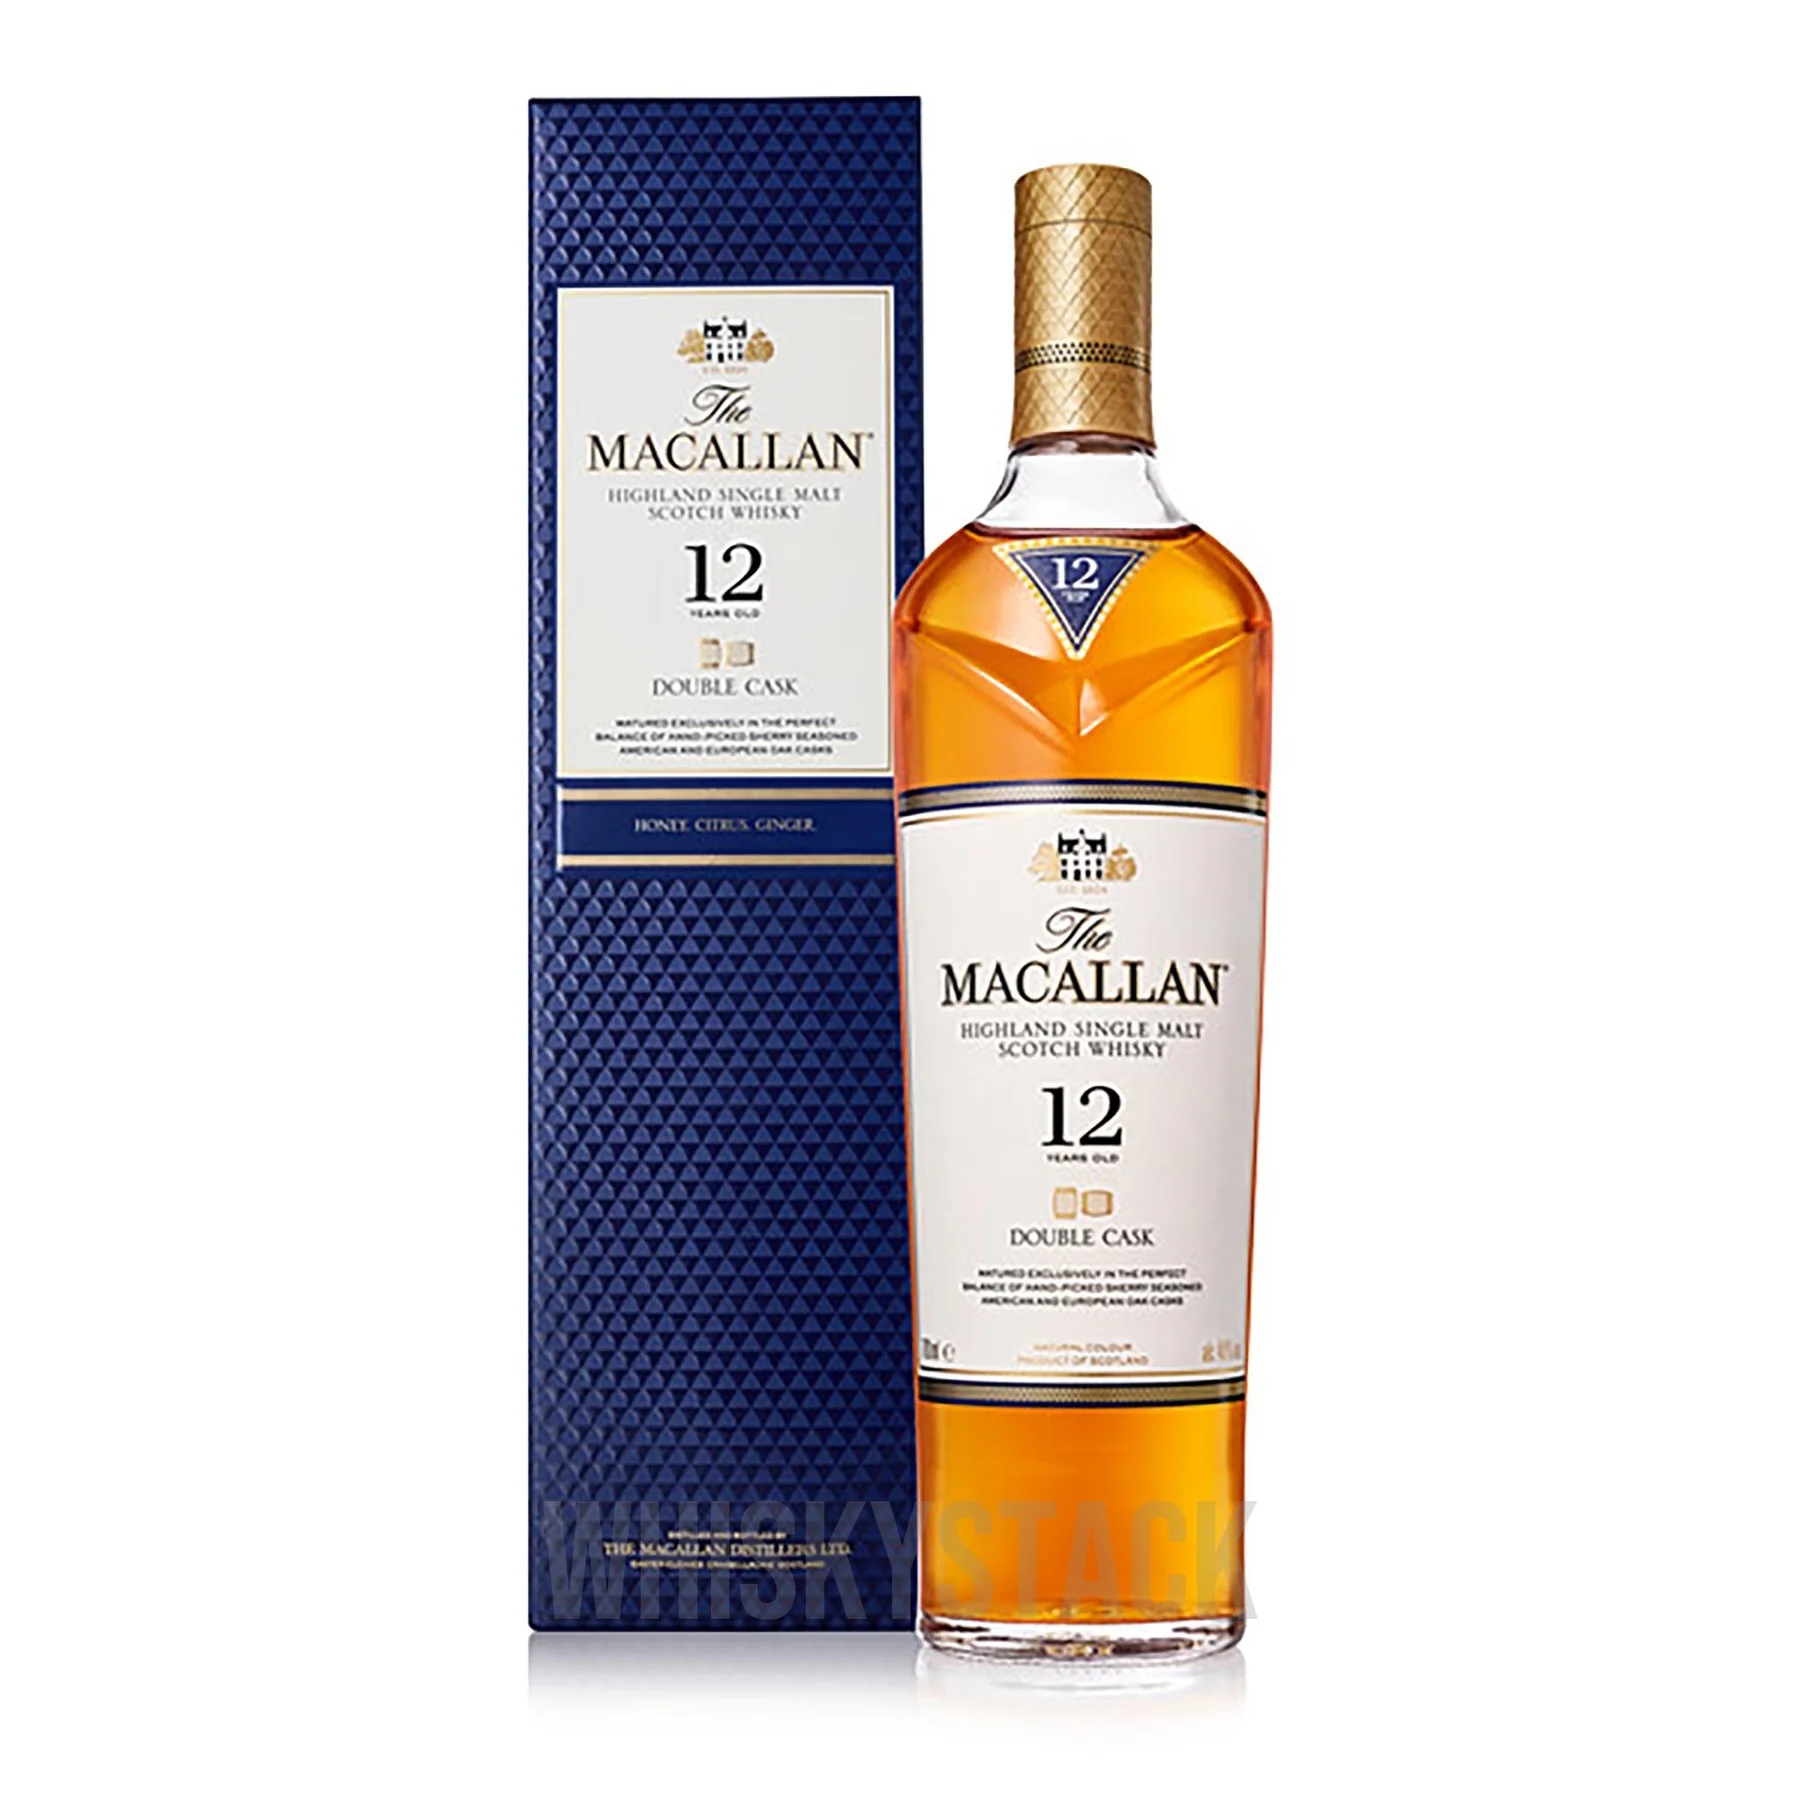 Discover the luxurious taste of The Macallan Double Cask 12 Years Old Single Malt Scotch Whisky. Our review summary highlights its exceptional quality, rich aroma, and velvety smoothness. Perfect for whisky connoisseurs and newcomers alike. Rated 4.9 stars on Amazon.